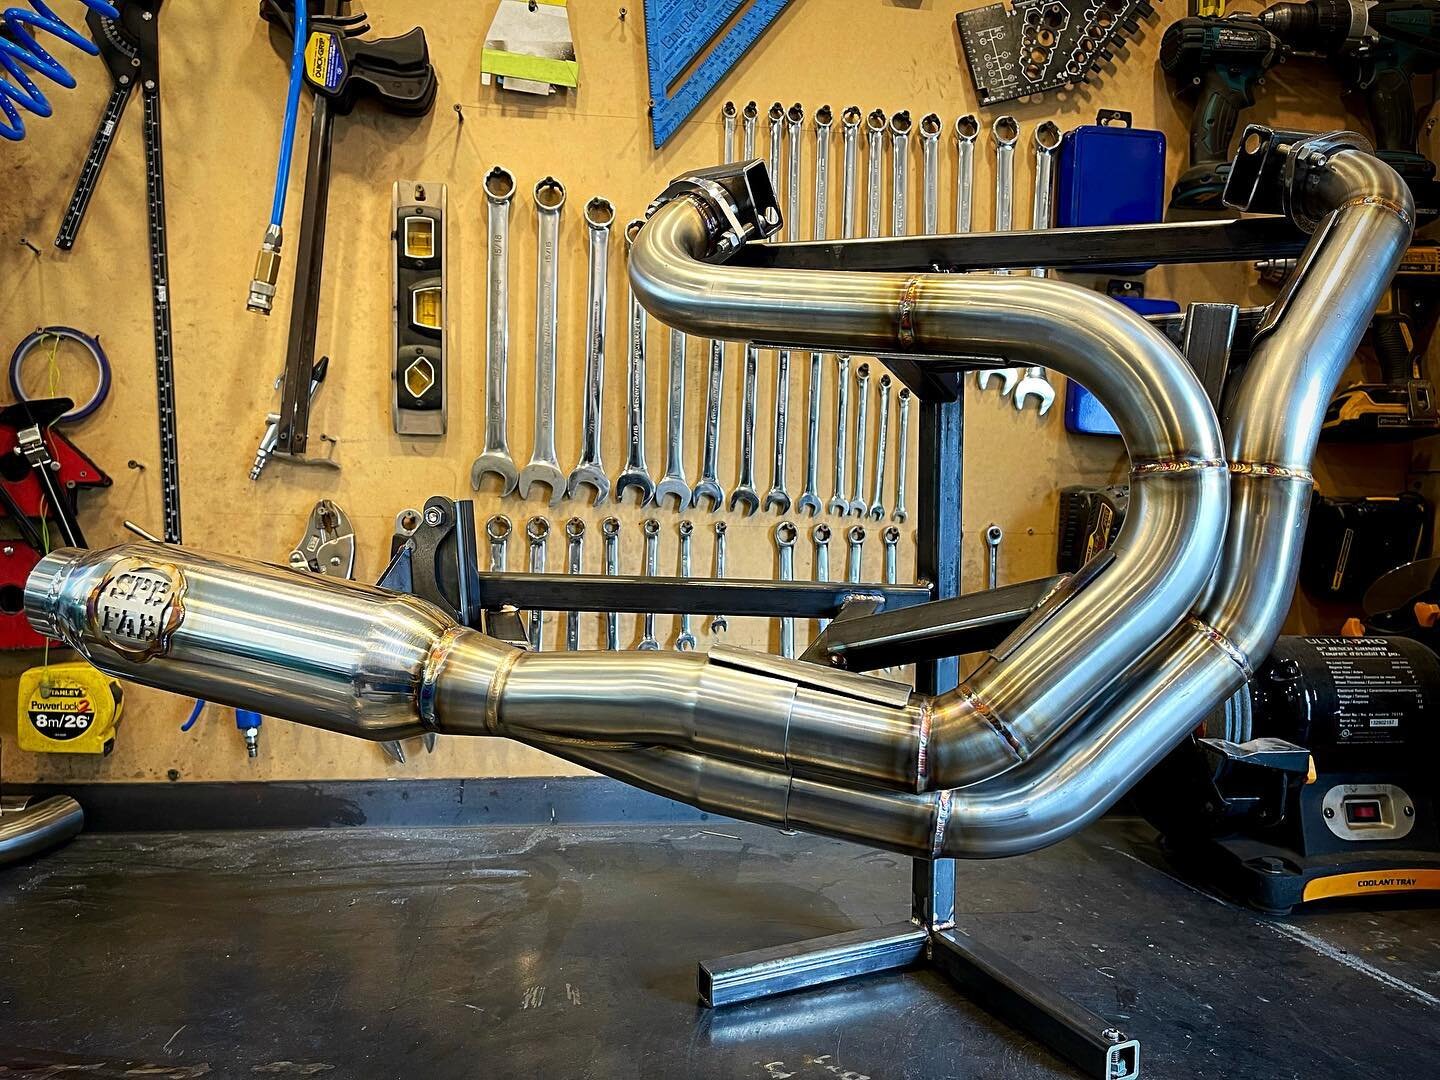 🚨 New product alert 🚨
Harley Dyna early &amp; late
Long headers to bring even more torque !
.
Contact us to be the first to have it before it goes on the website
.

#turboharley #harleydavidson #harleydavidsonmotorcycle #harleydavidsonmotorcycles #